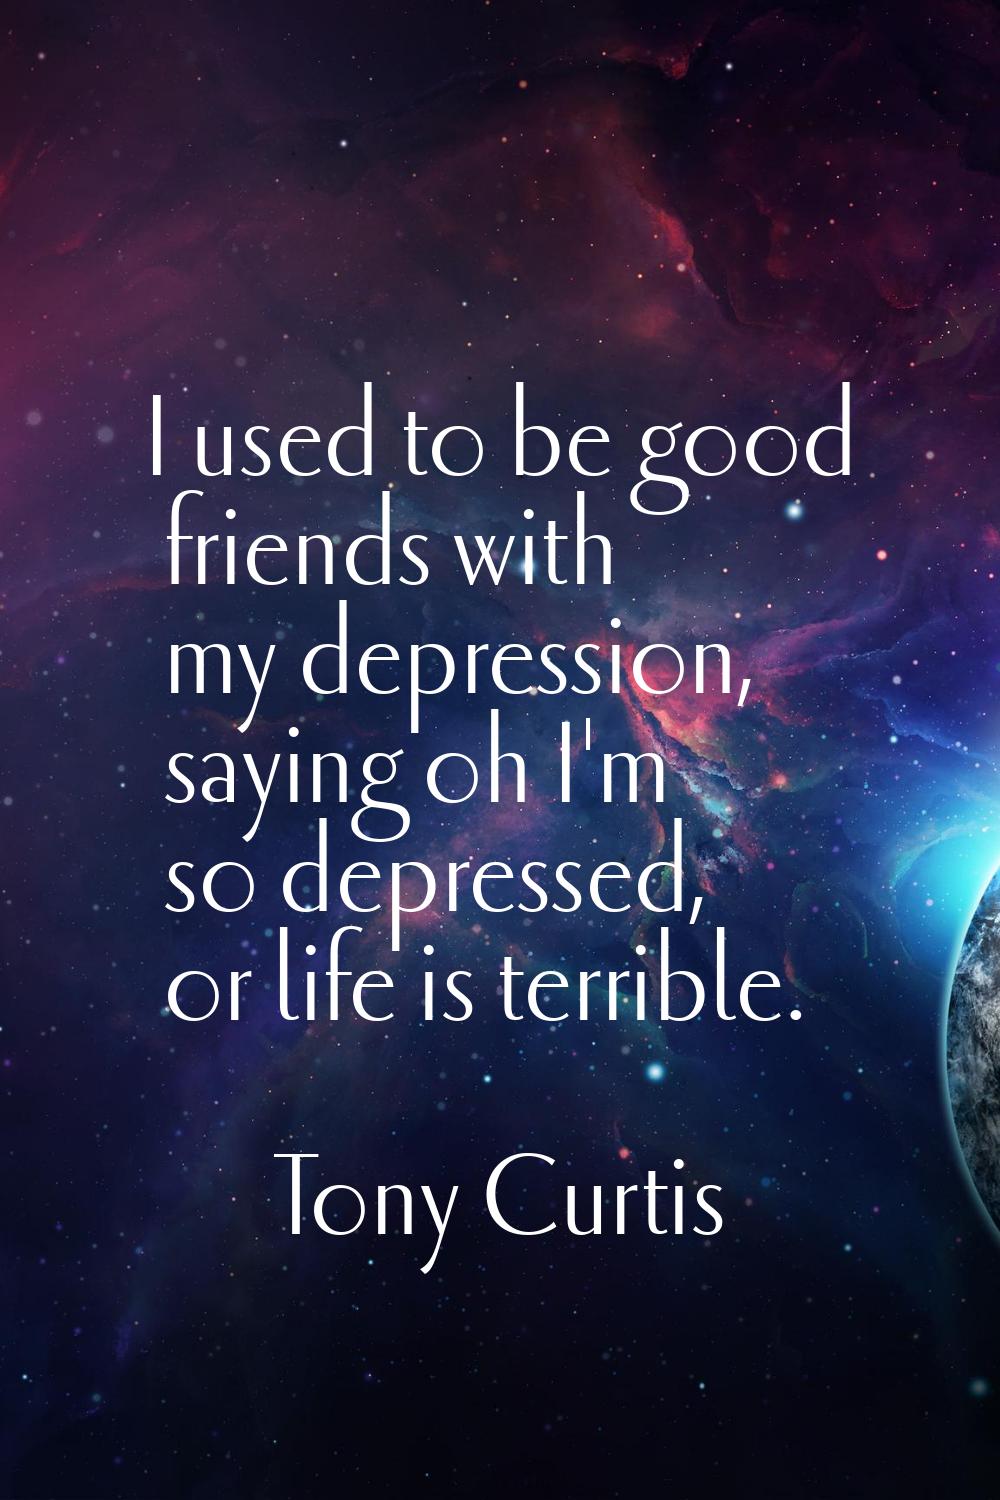 I used to be good friends with my depression, saying oh I'm so depressed, or life is terrible.